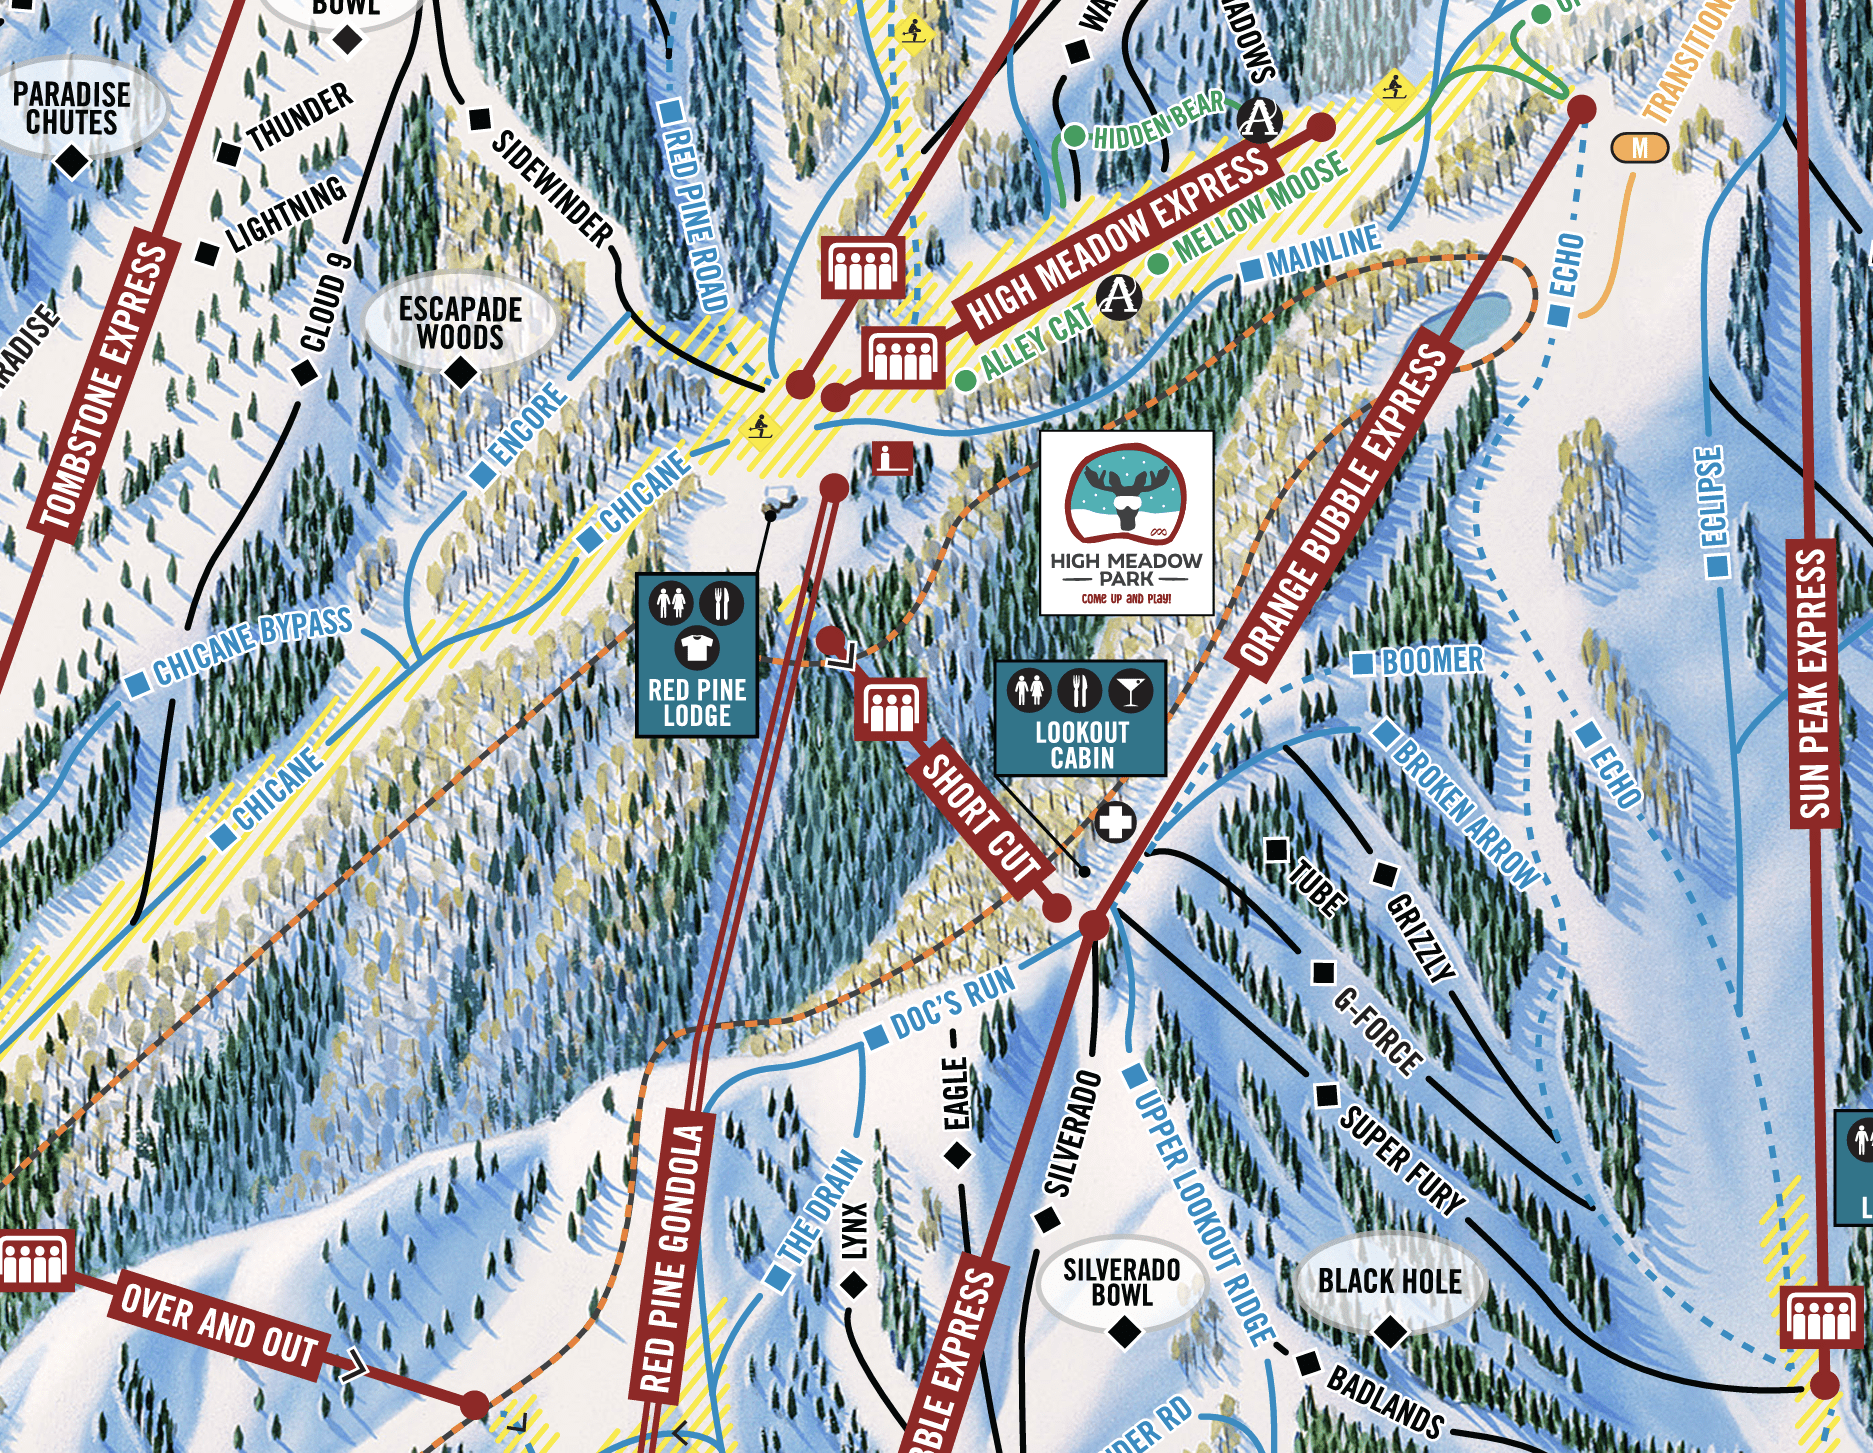 Trail Map on the Canyons Village side of Park City Mountain showing the location of High Meadow Park.